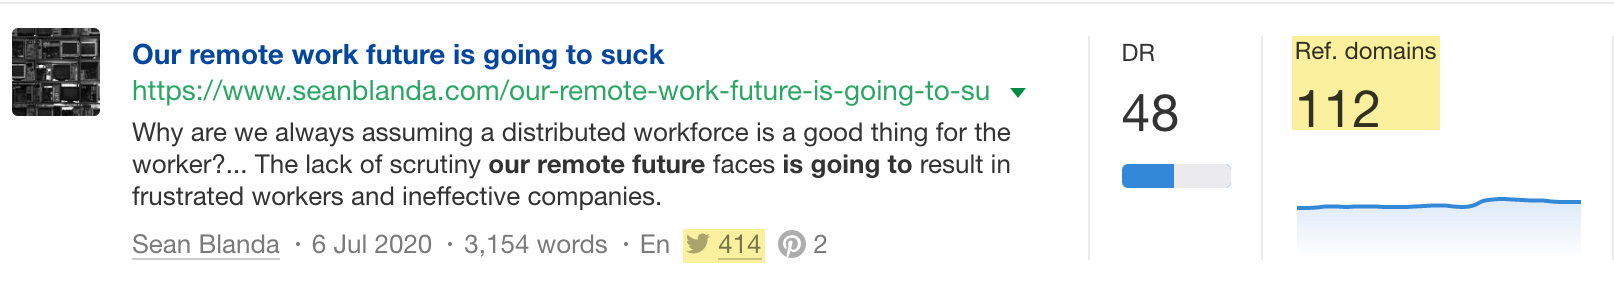 Stats for the post "Our remote work future is going to suck"
